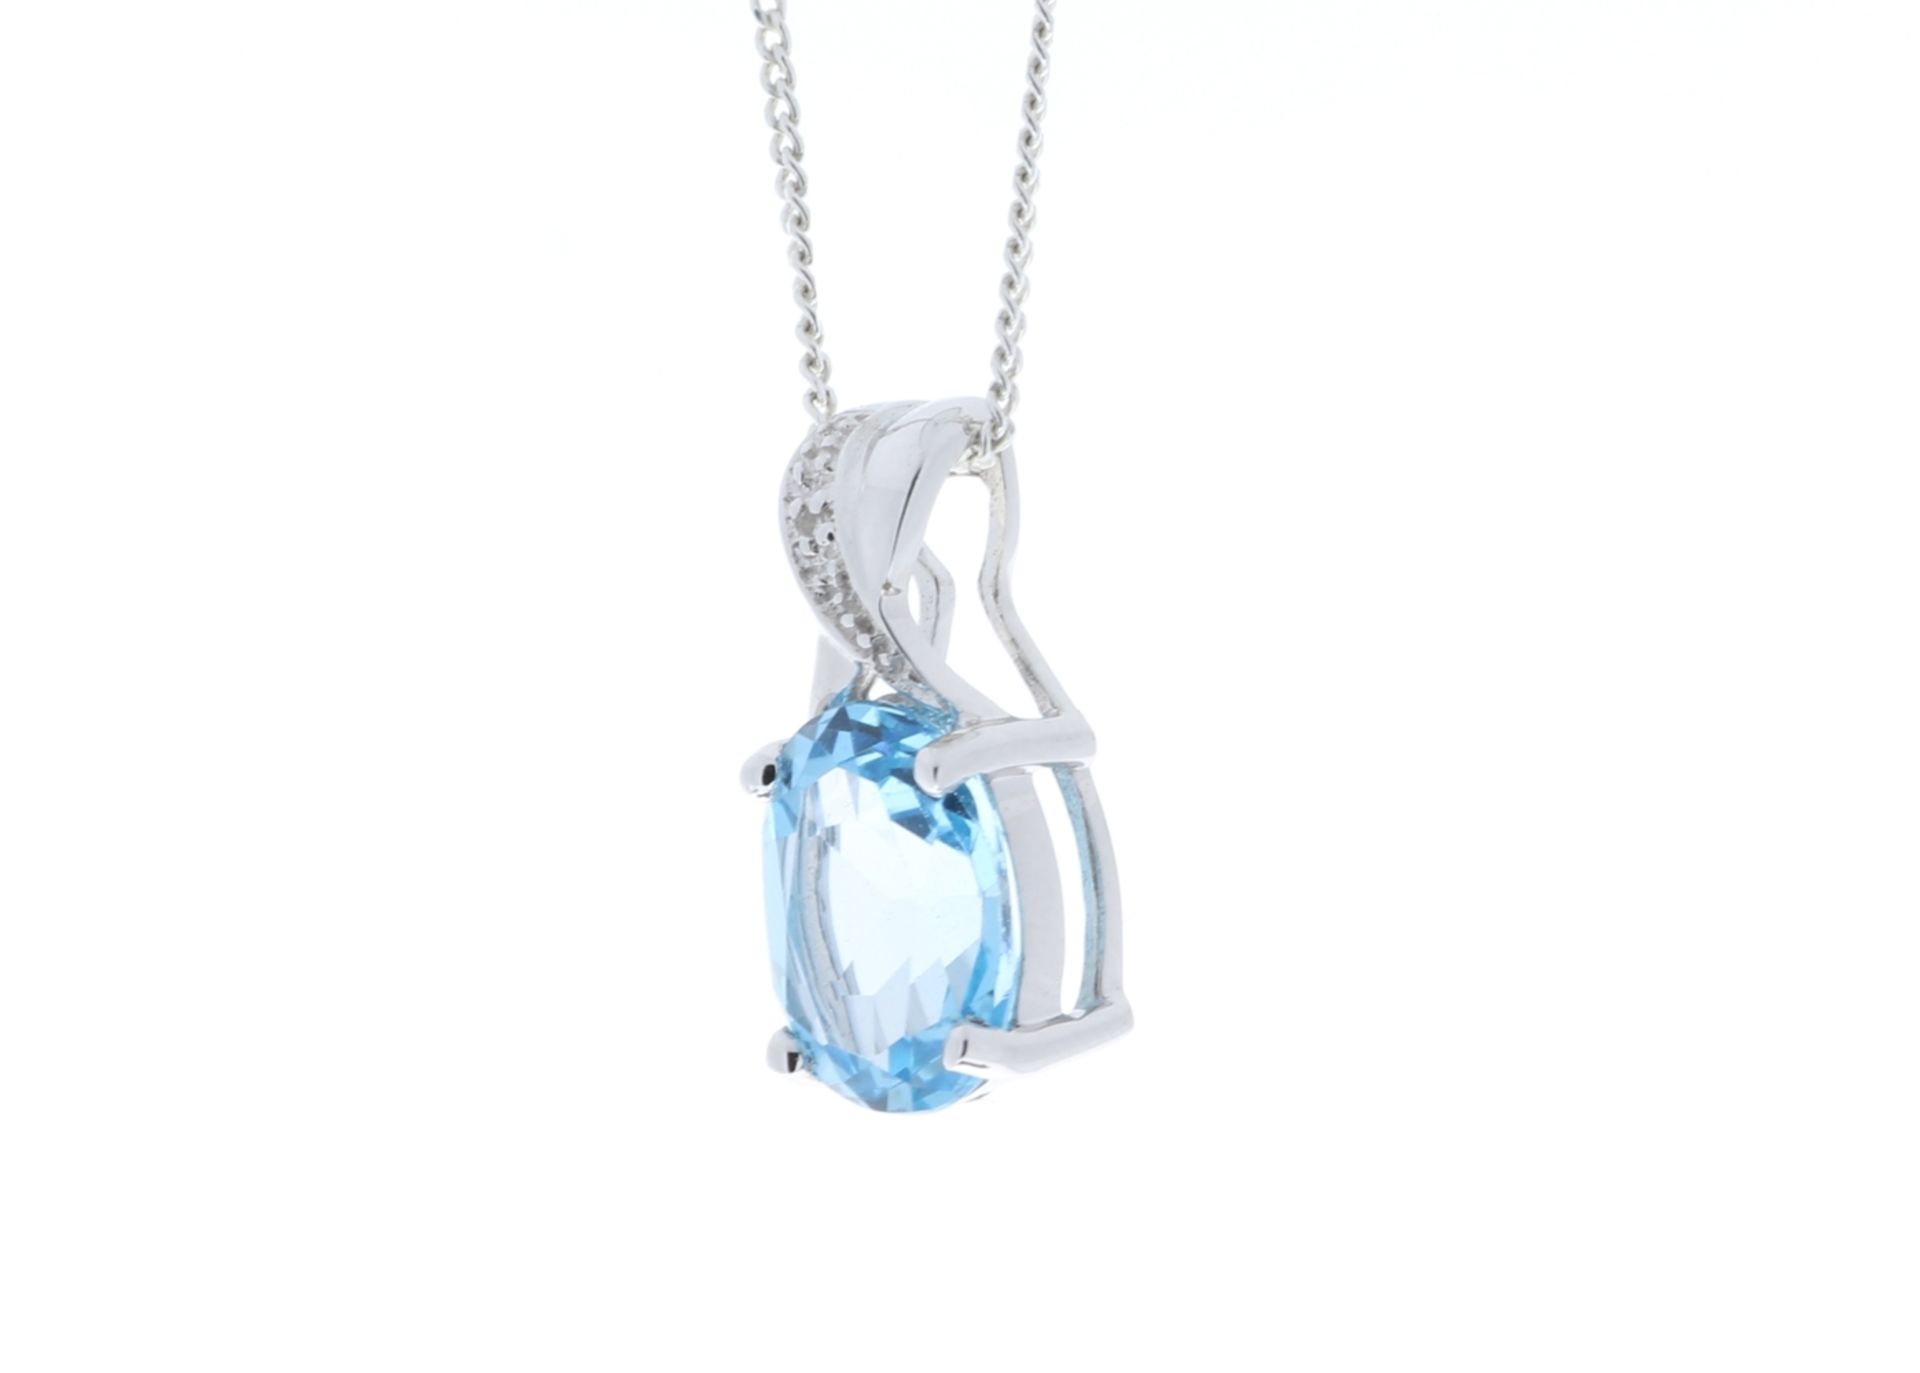 9ct White Gold Diamond And Blue Topaz Pendant 0.01 Carats - Valued by GIE £380.00 - 9ct White Gold - Image 4 of 6